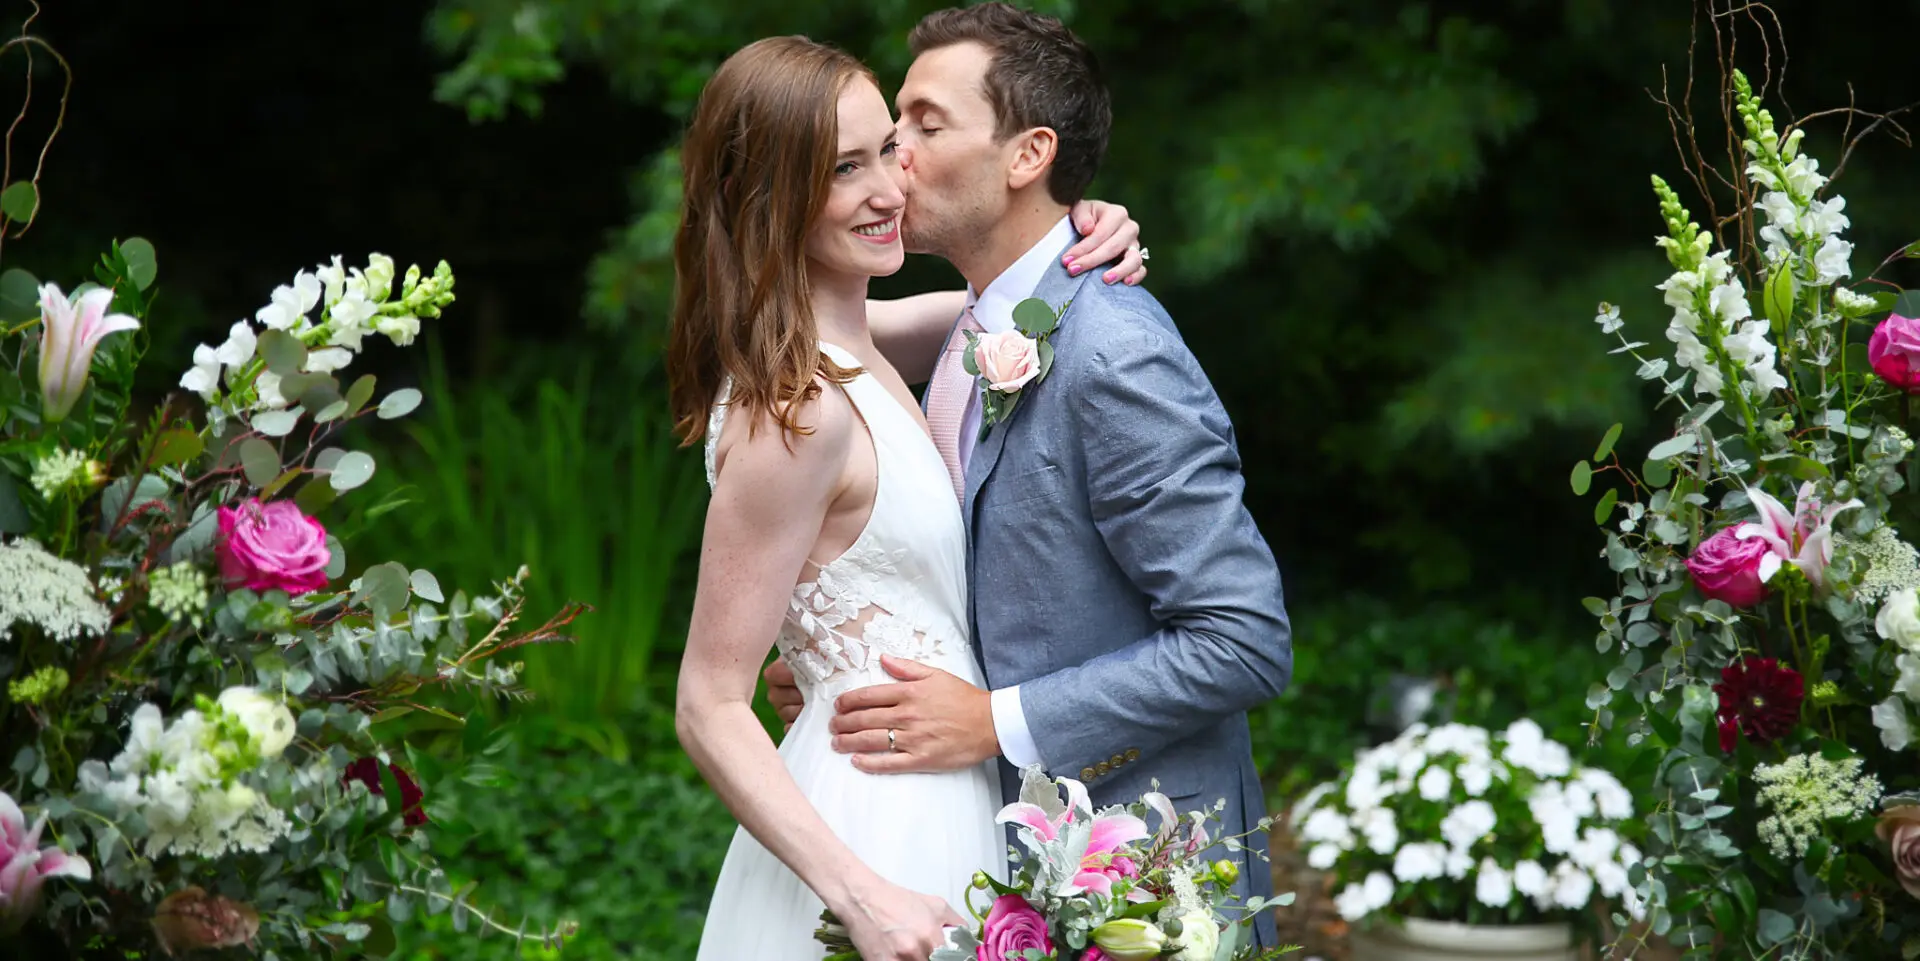 Bride and groom share a romantic kiss in garden